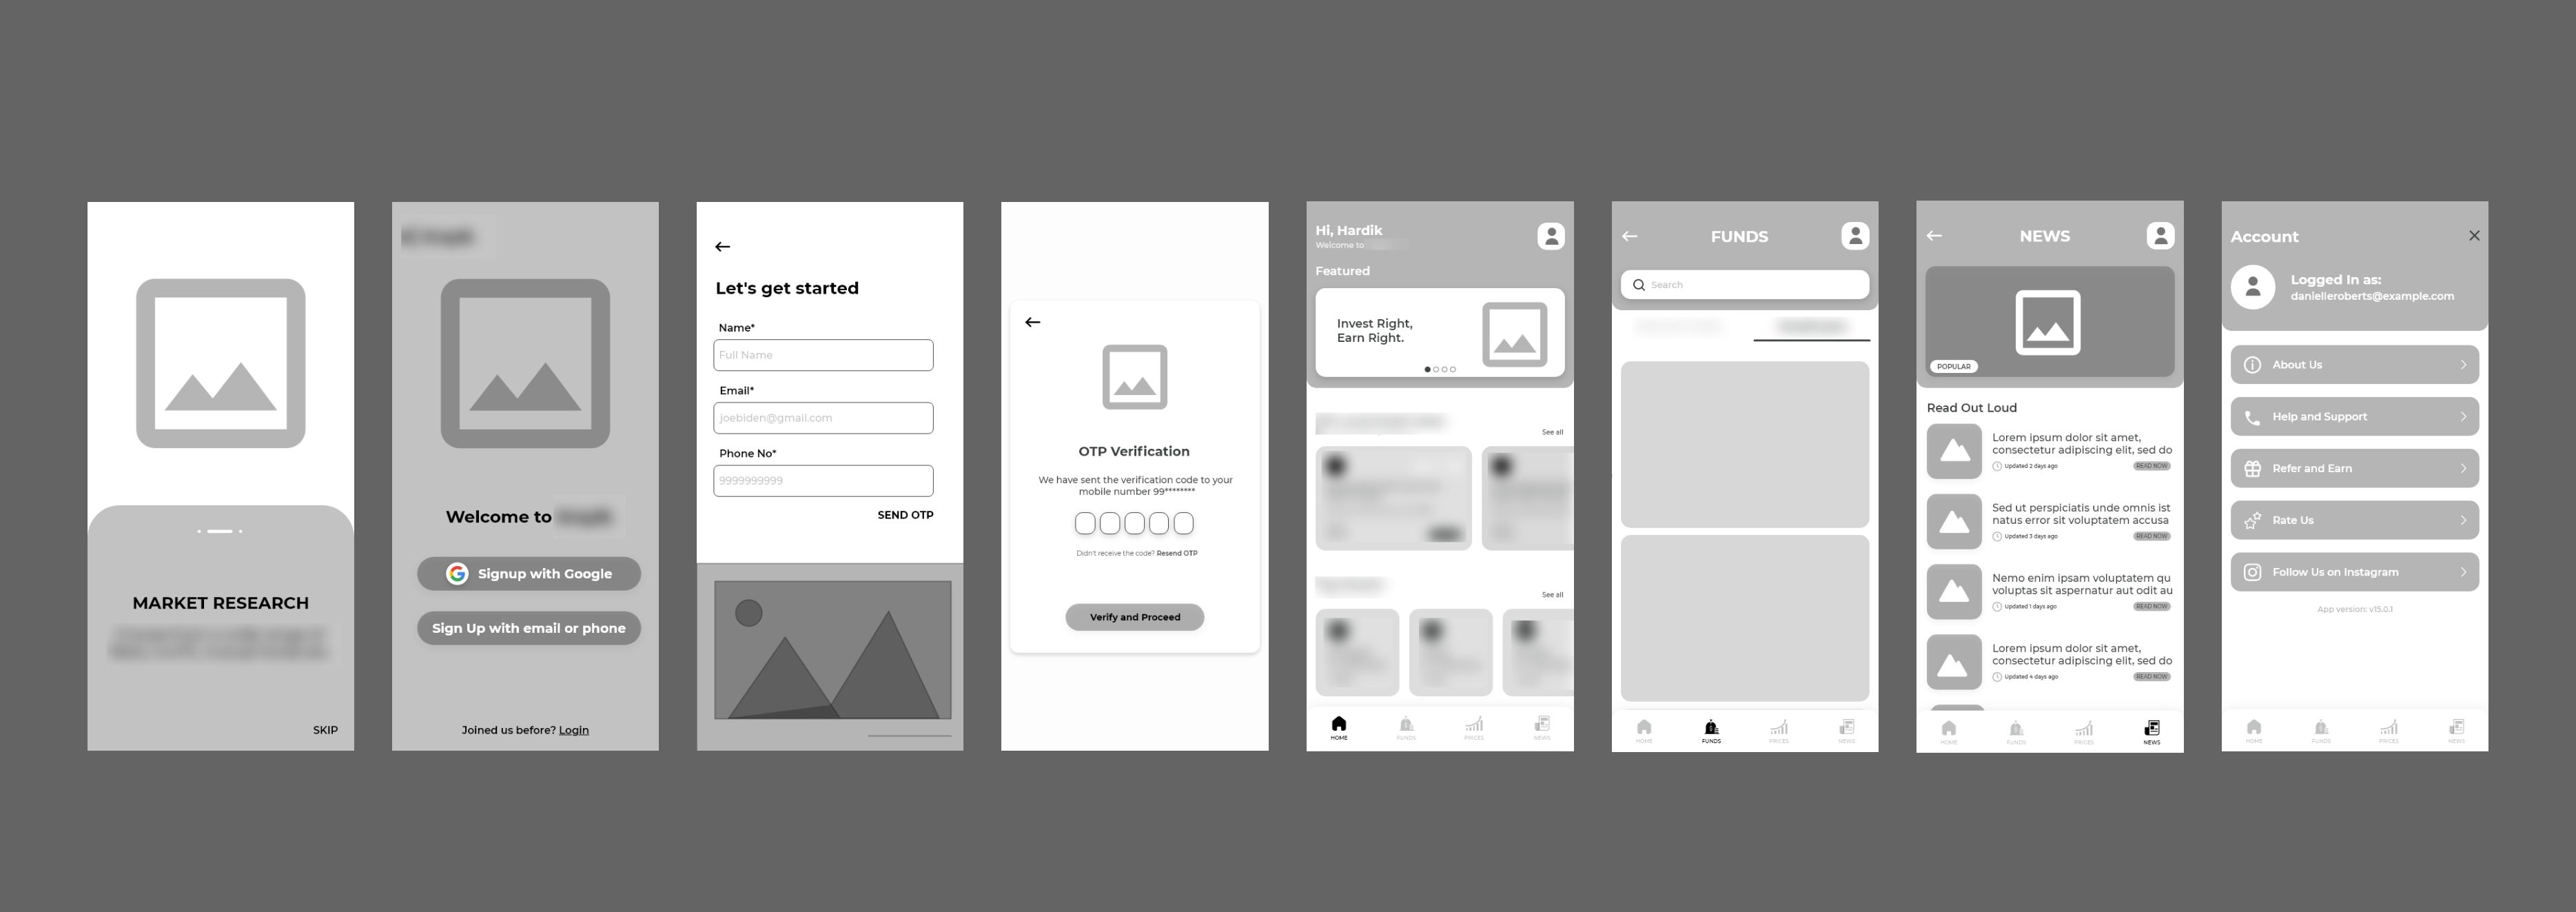 Digital Wireframing- Some content is hidden under corporate restriction.